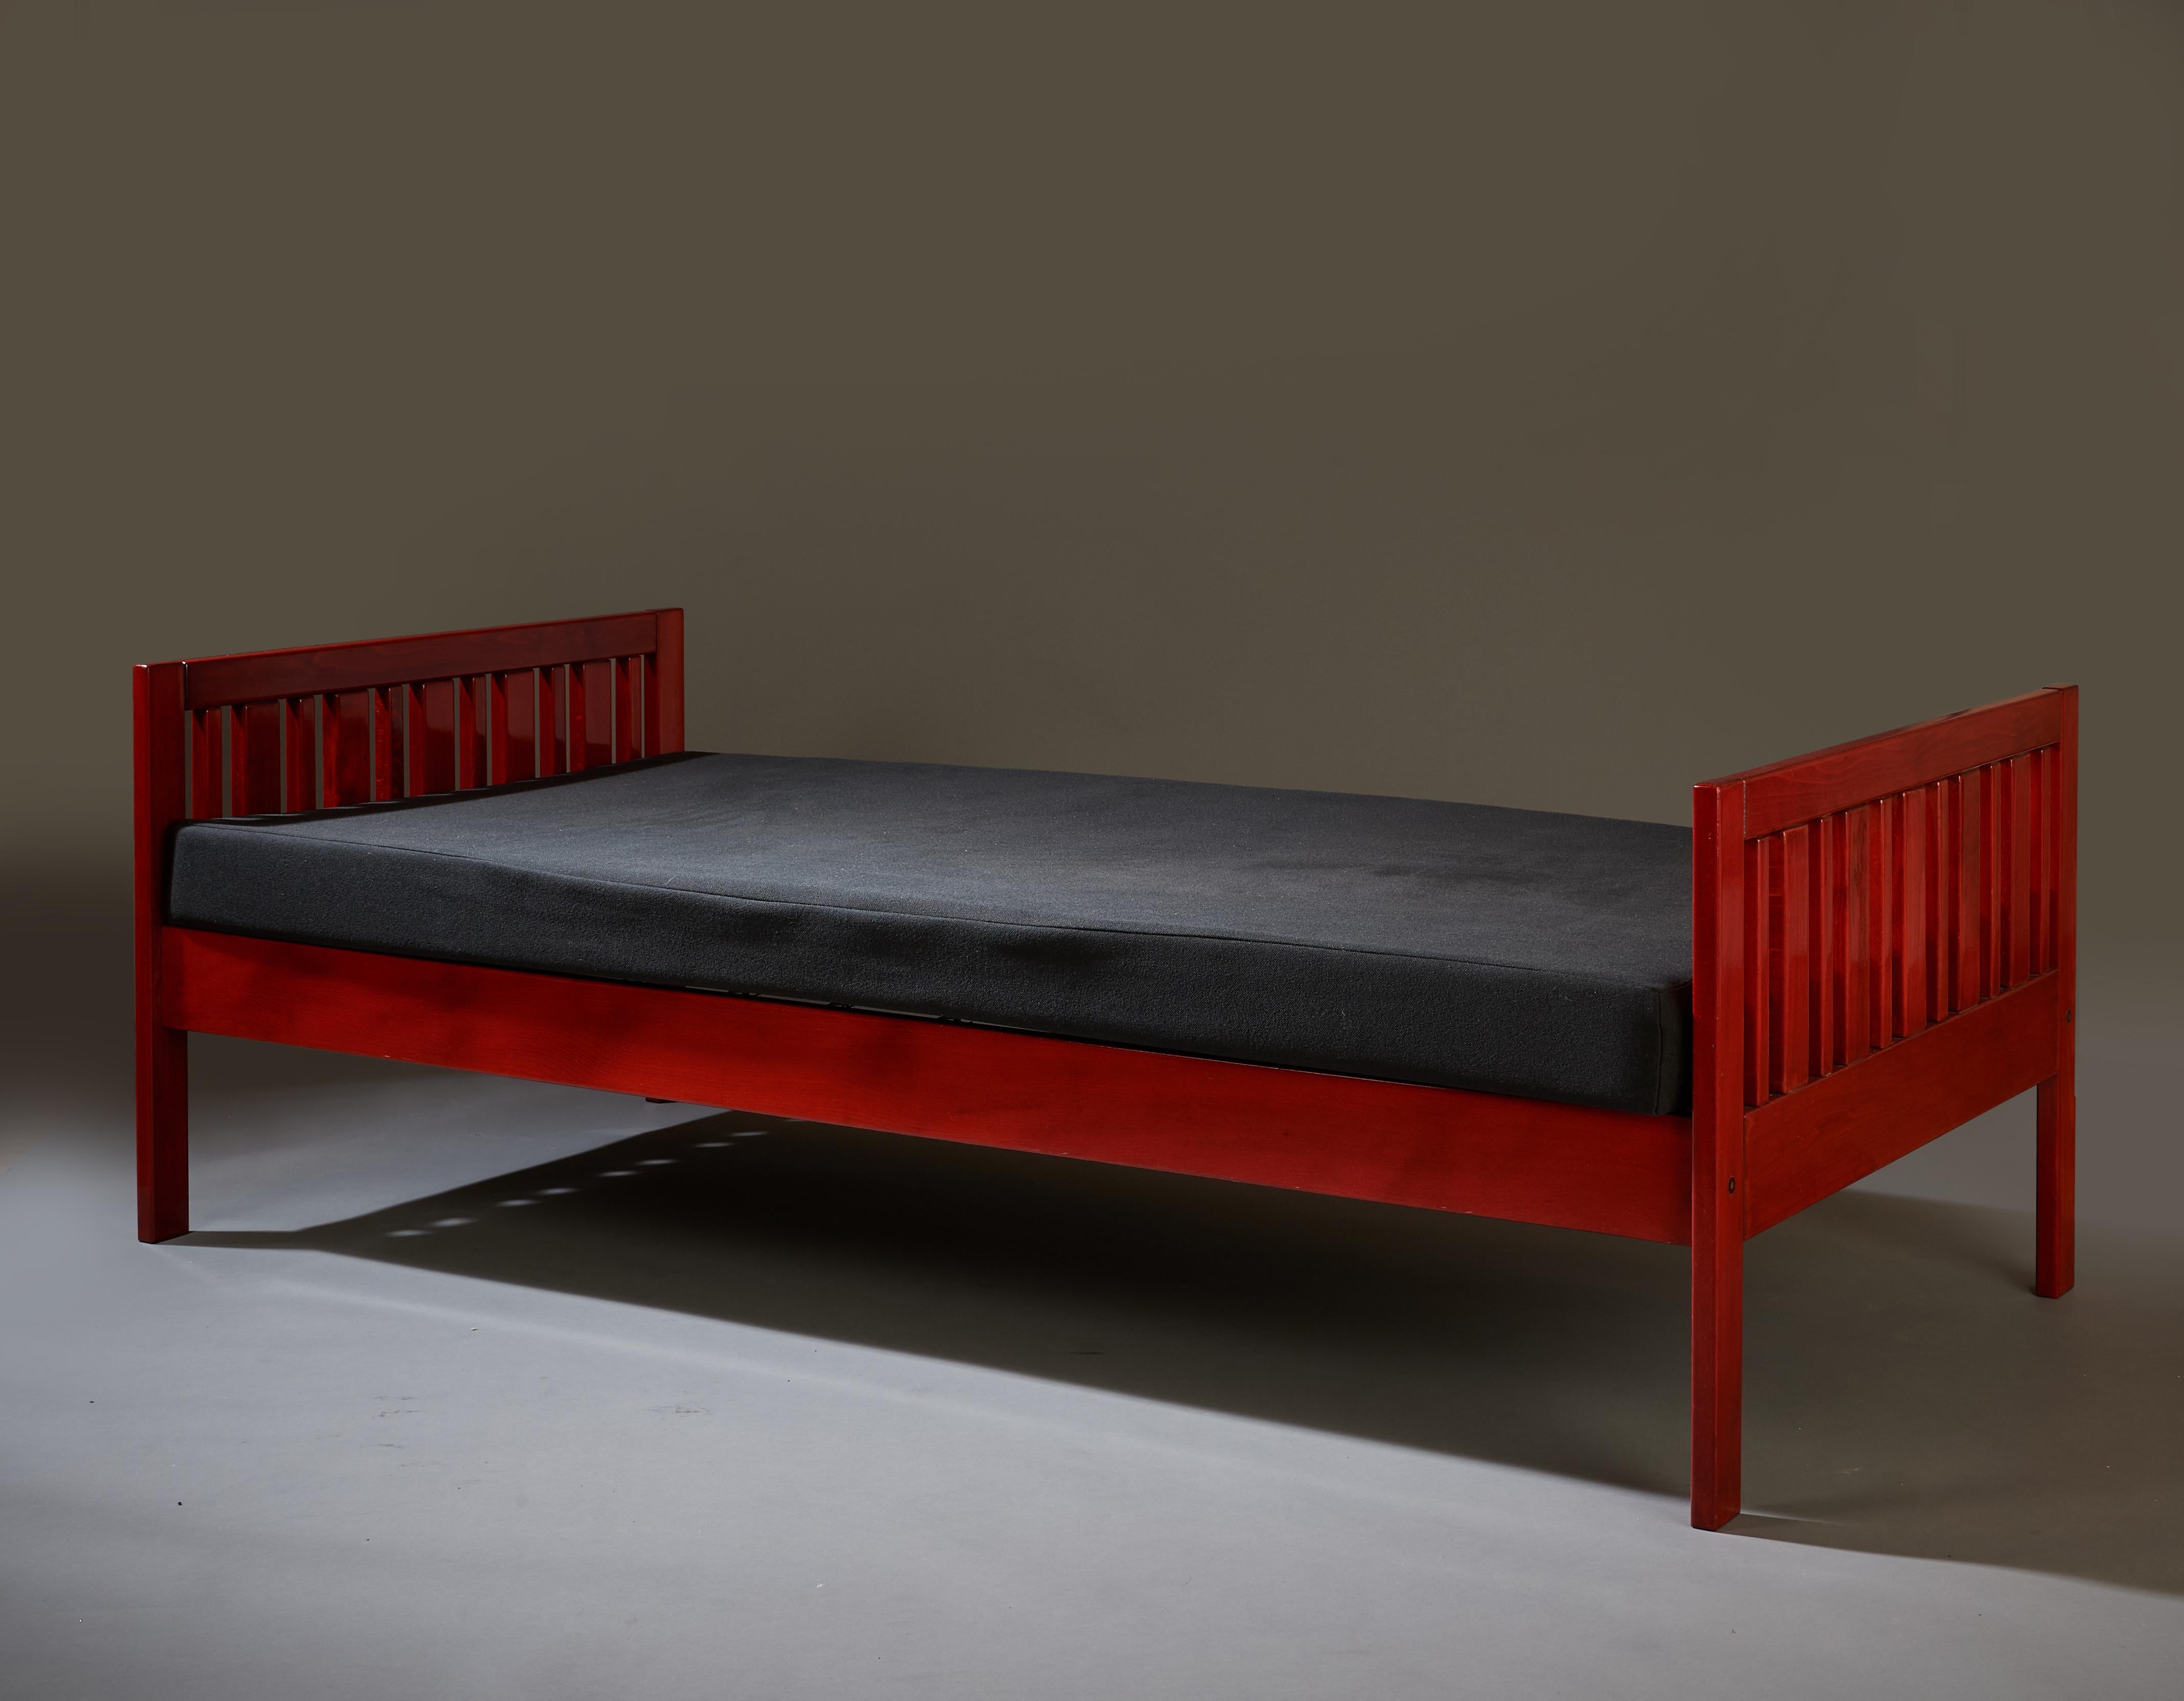 Ettore Sottsass Daybed, Red Lacquered Wood, Chartreuse Upholstery, Italy c. 1962 For Sale 3